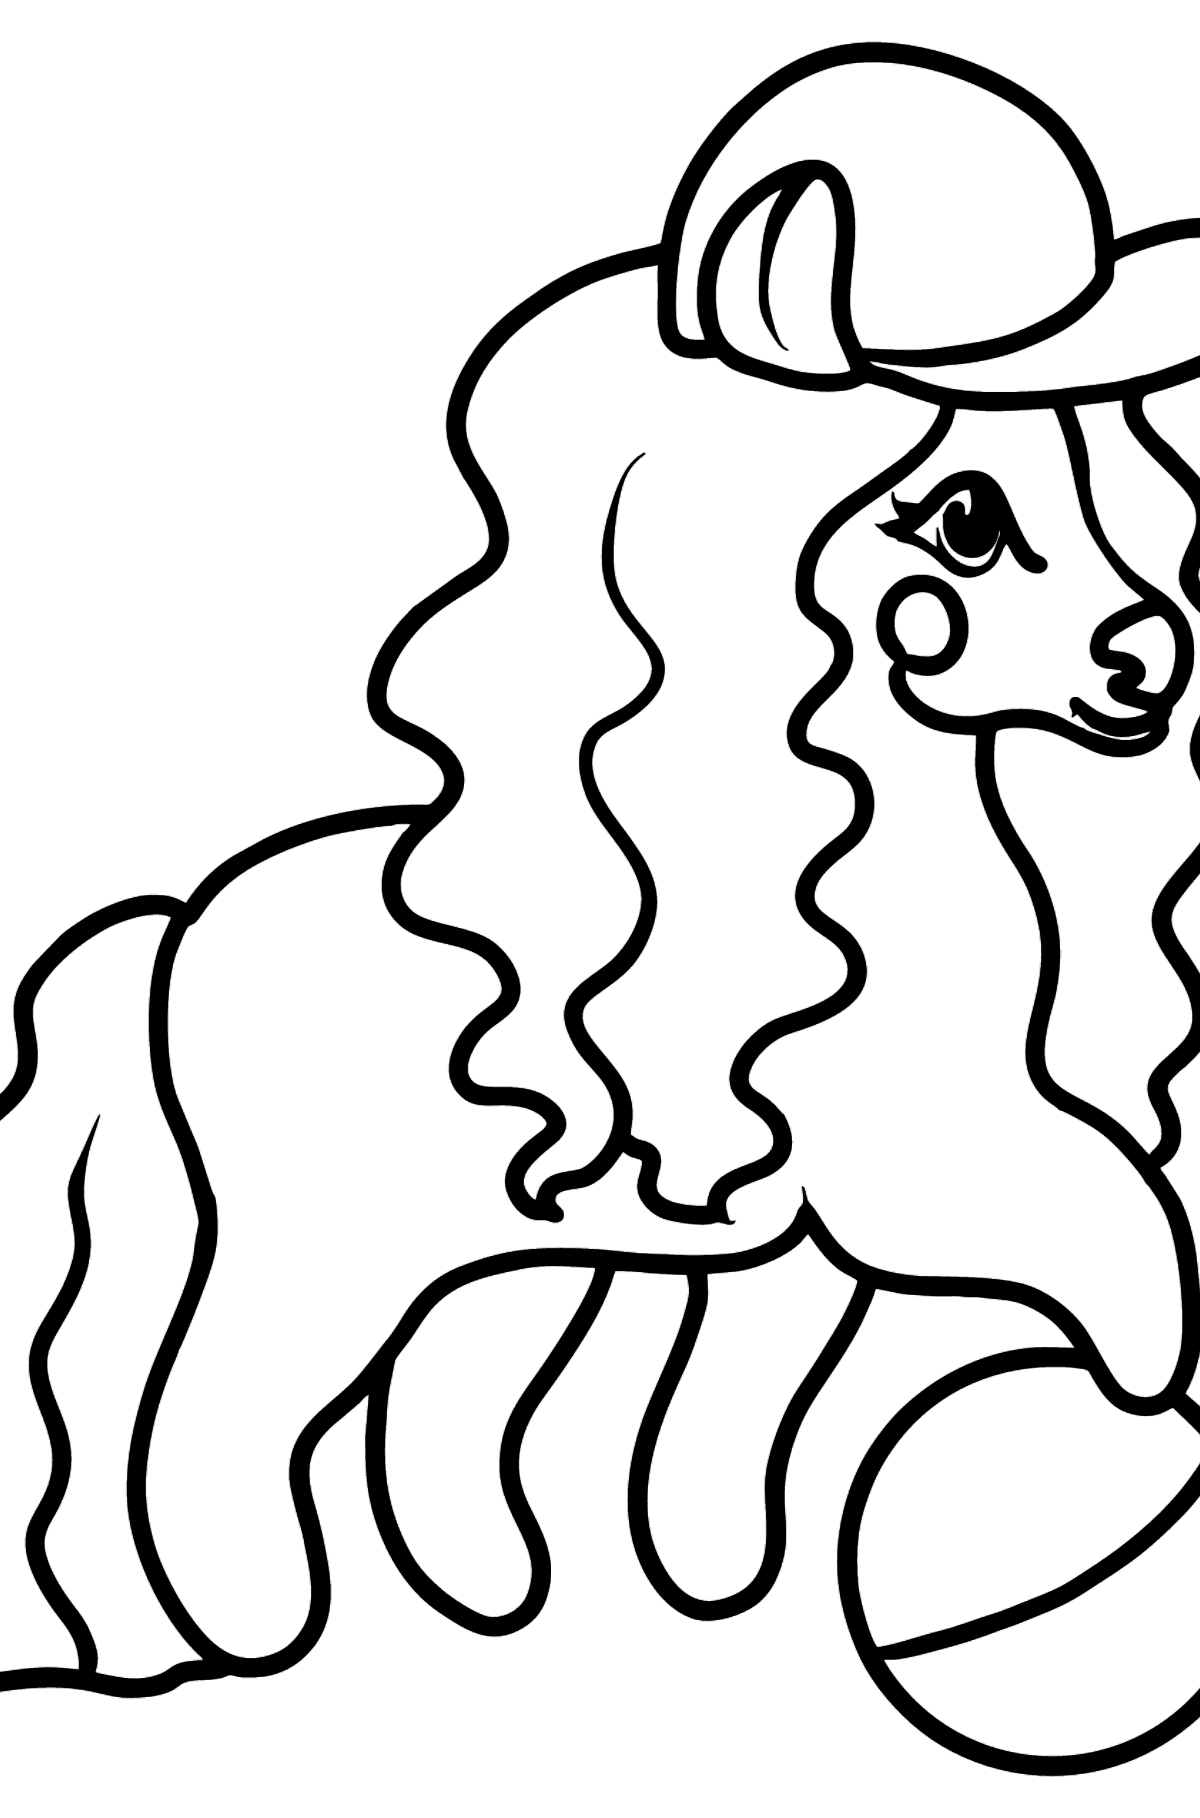 Pony with Ball coloring page - Coloring Pages for Kids